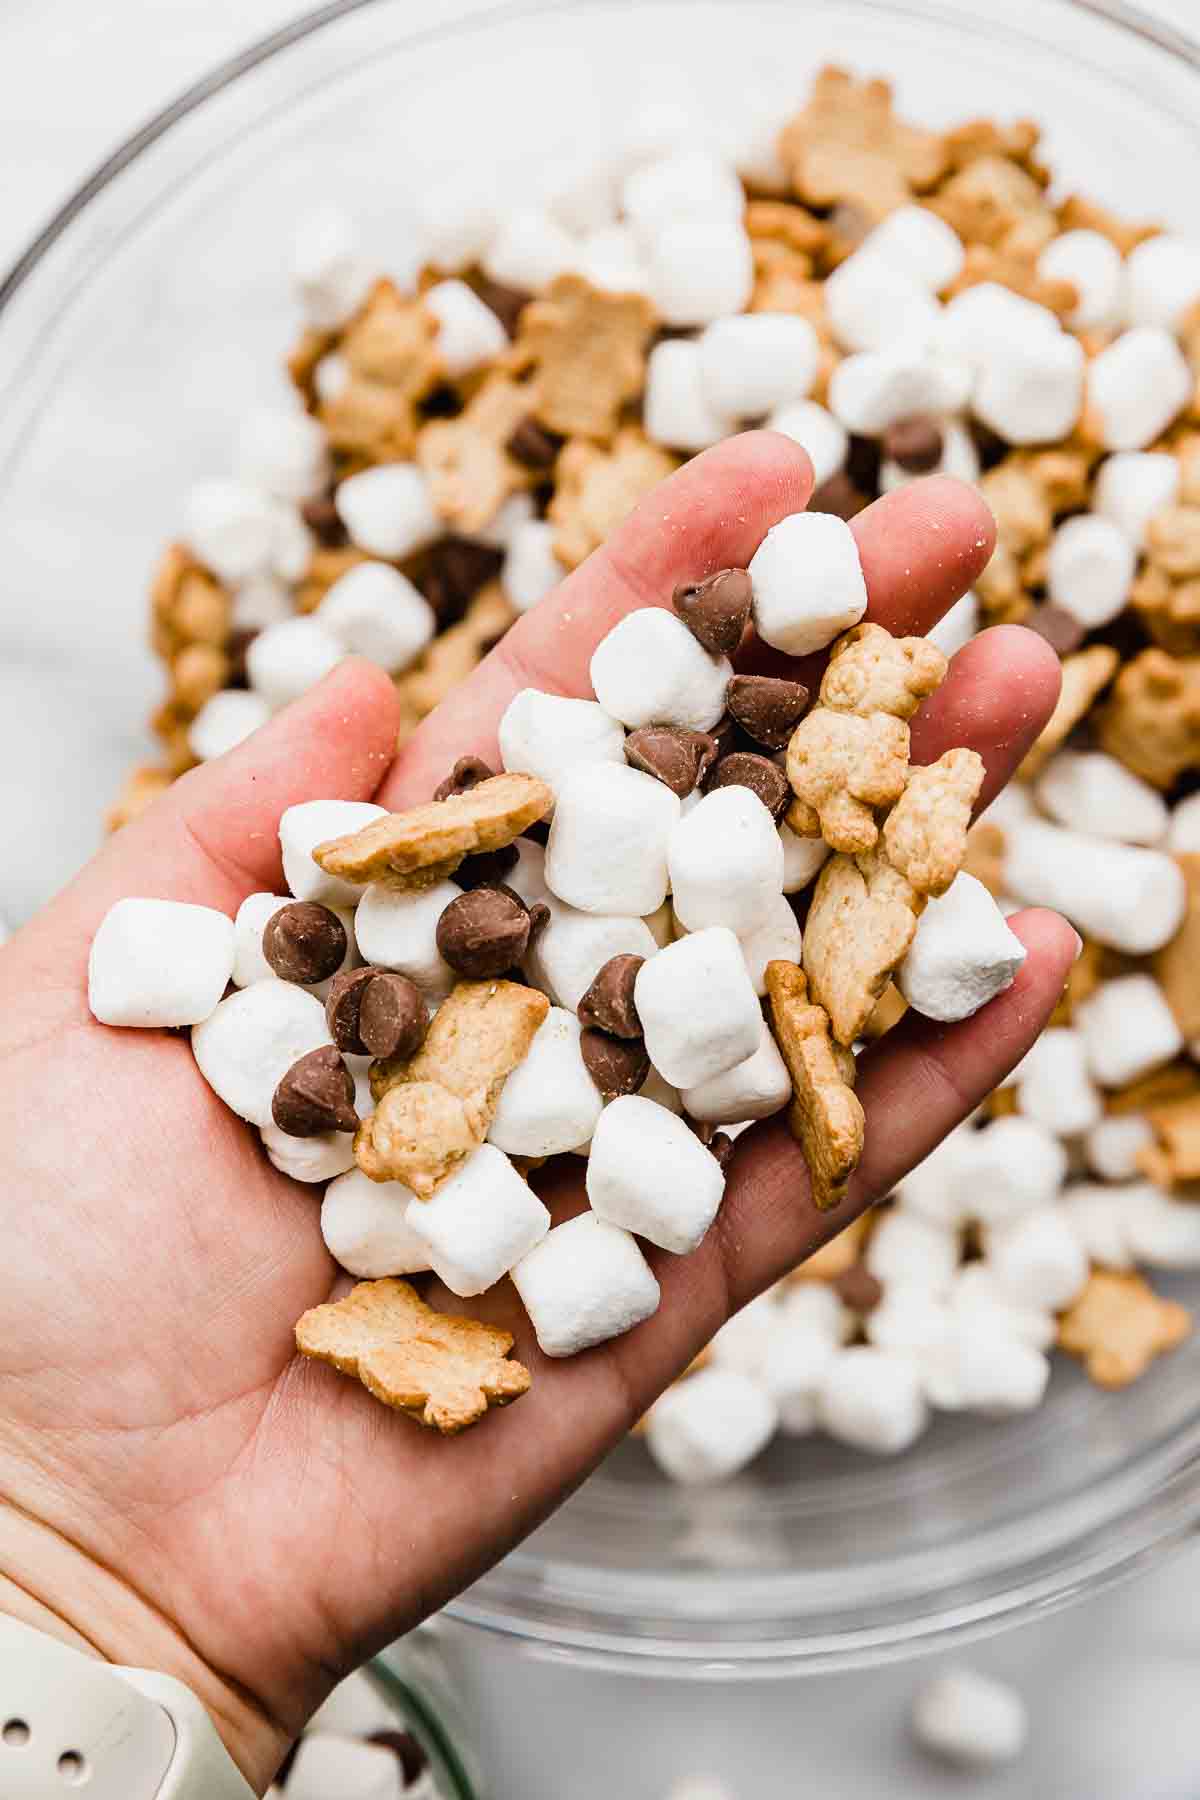 A hand holding S'mores snack mix.